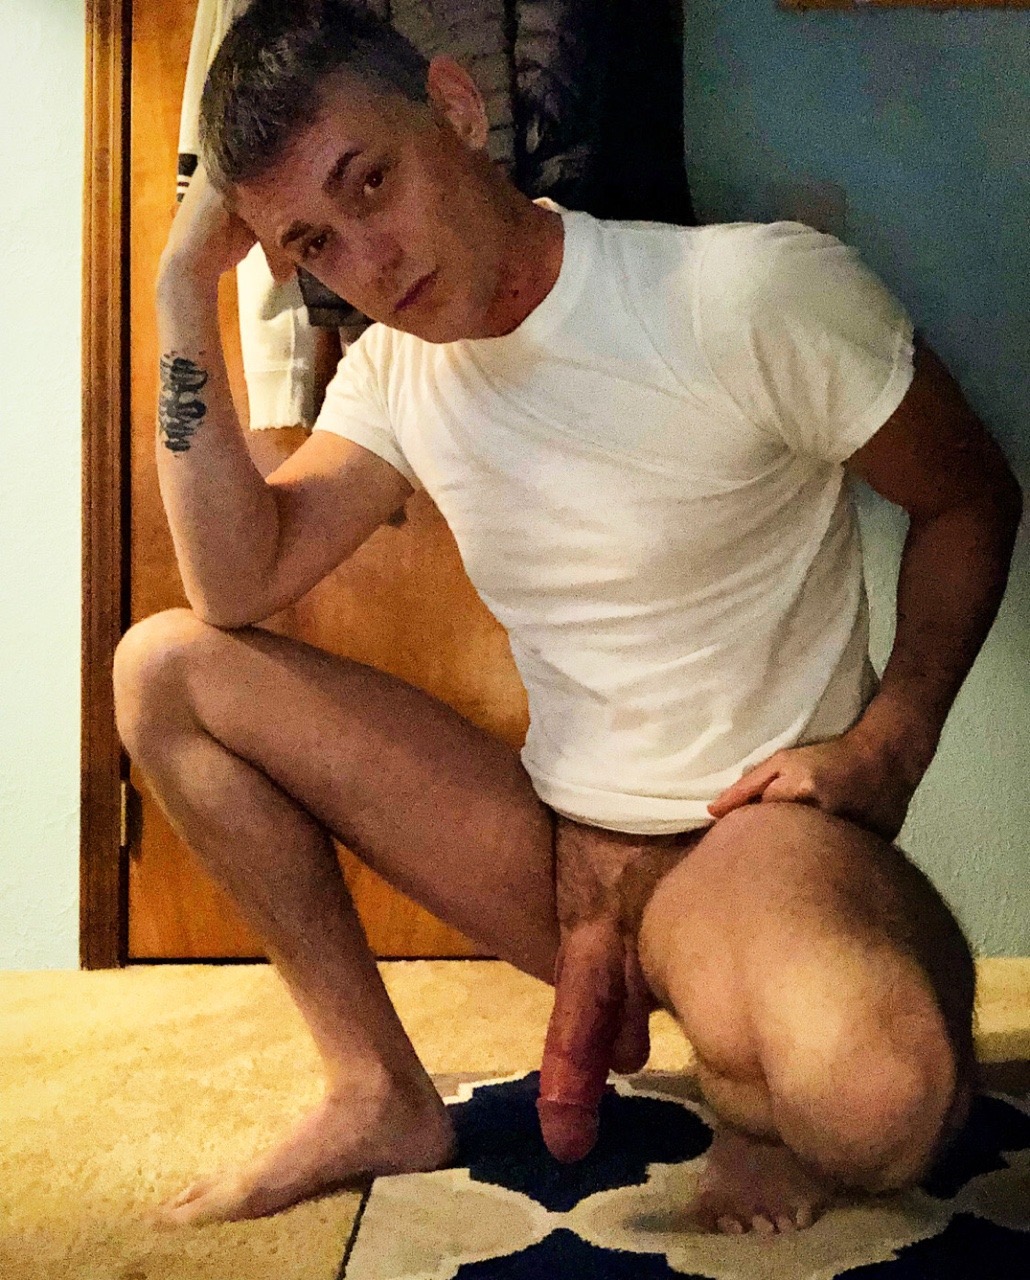 blockquote onlyfans.com/nicksecretsxxx Anyone subscribed to Nickâ€™s OnlyFans...